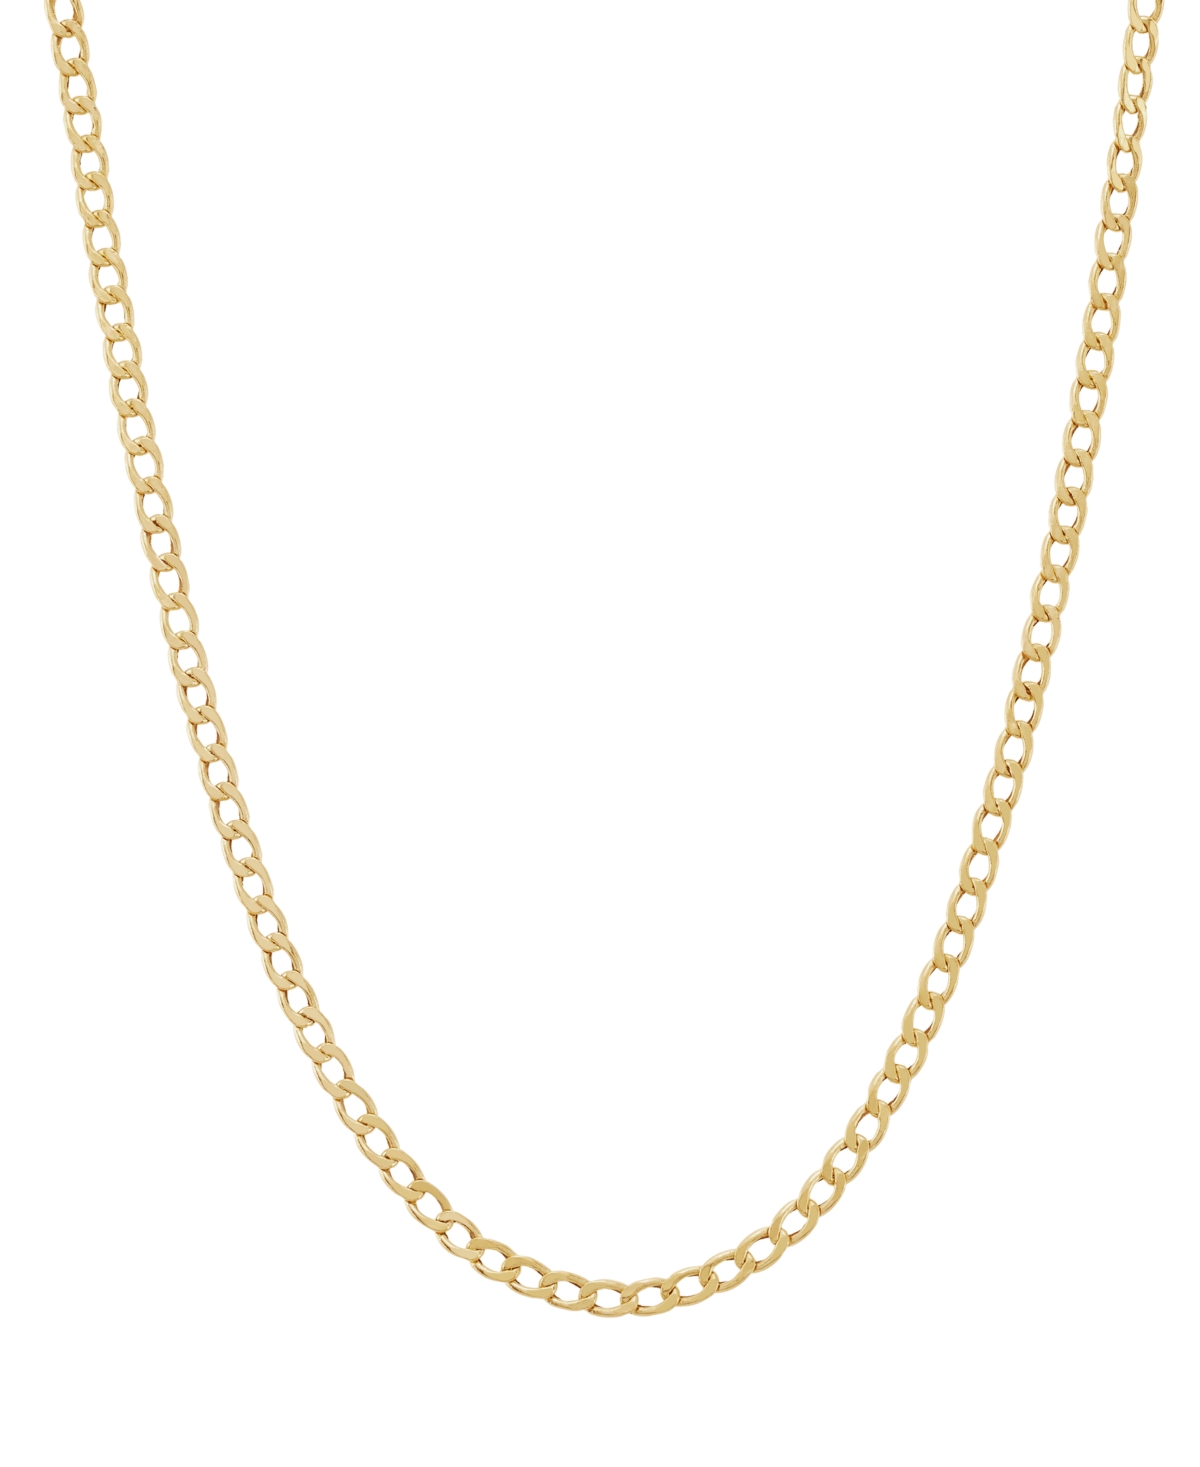 Italian Gold Kids' Children's Curb Link Chain Necklace In 14k Gold, 14" + 2" Extender